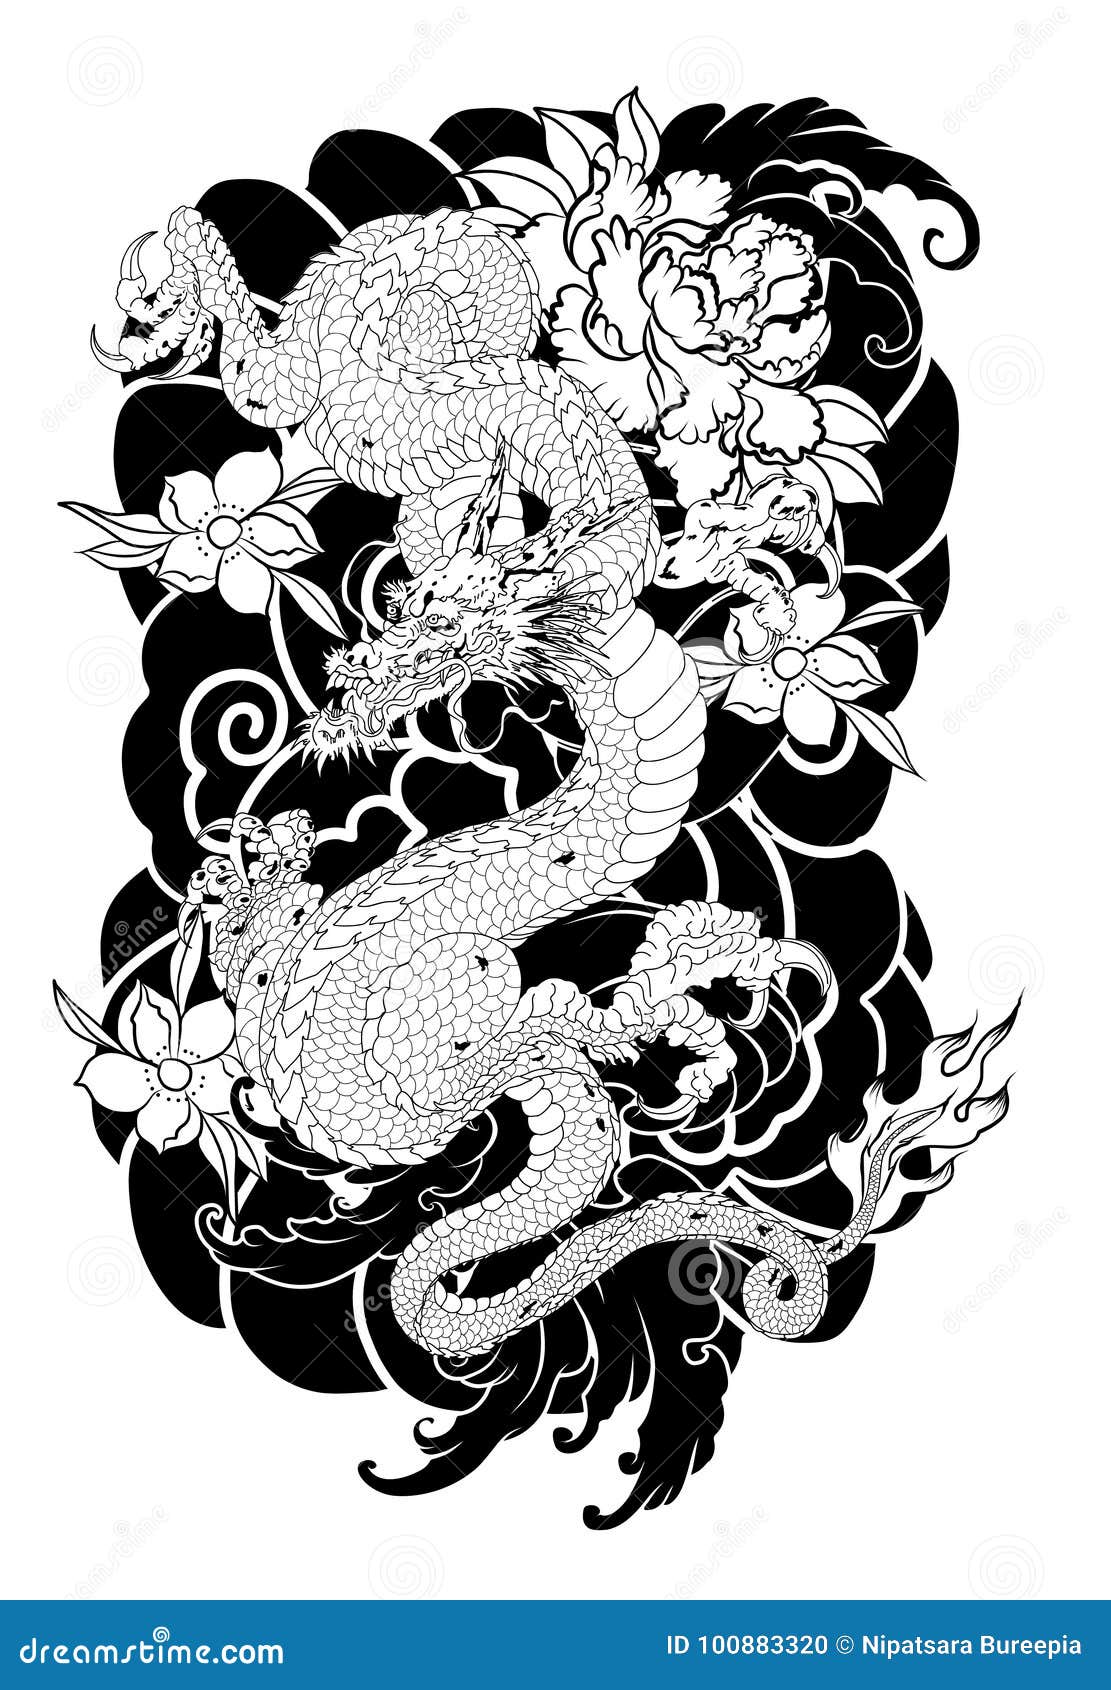 Dragon tattoo  meaning photos sketches and examples